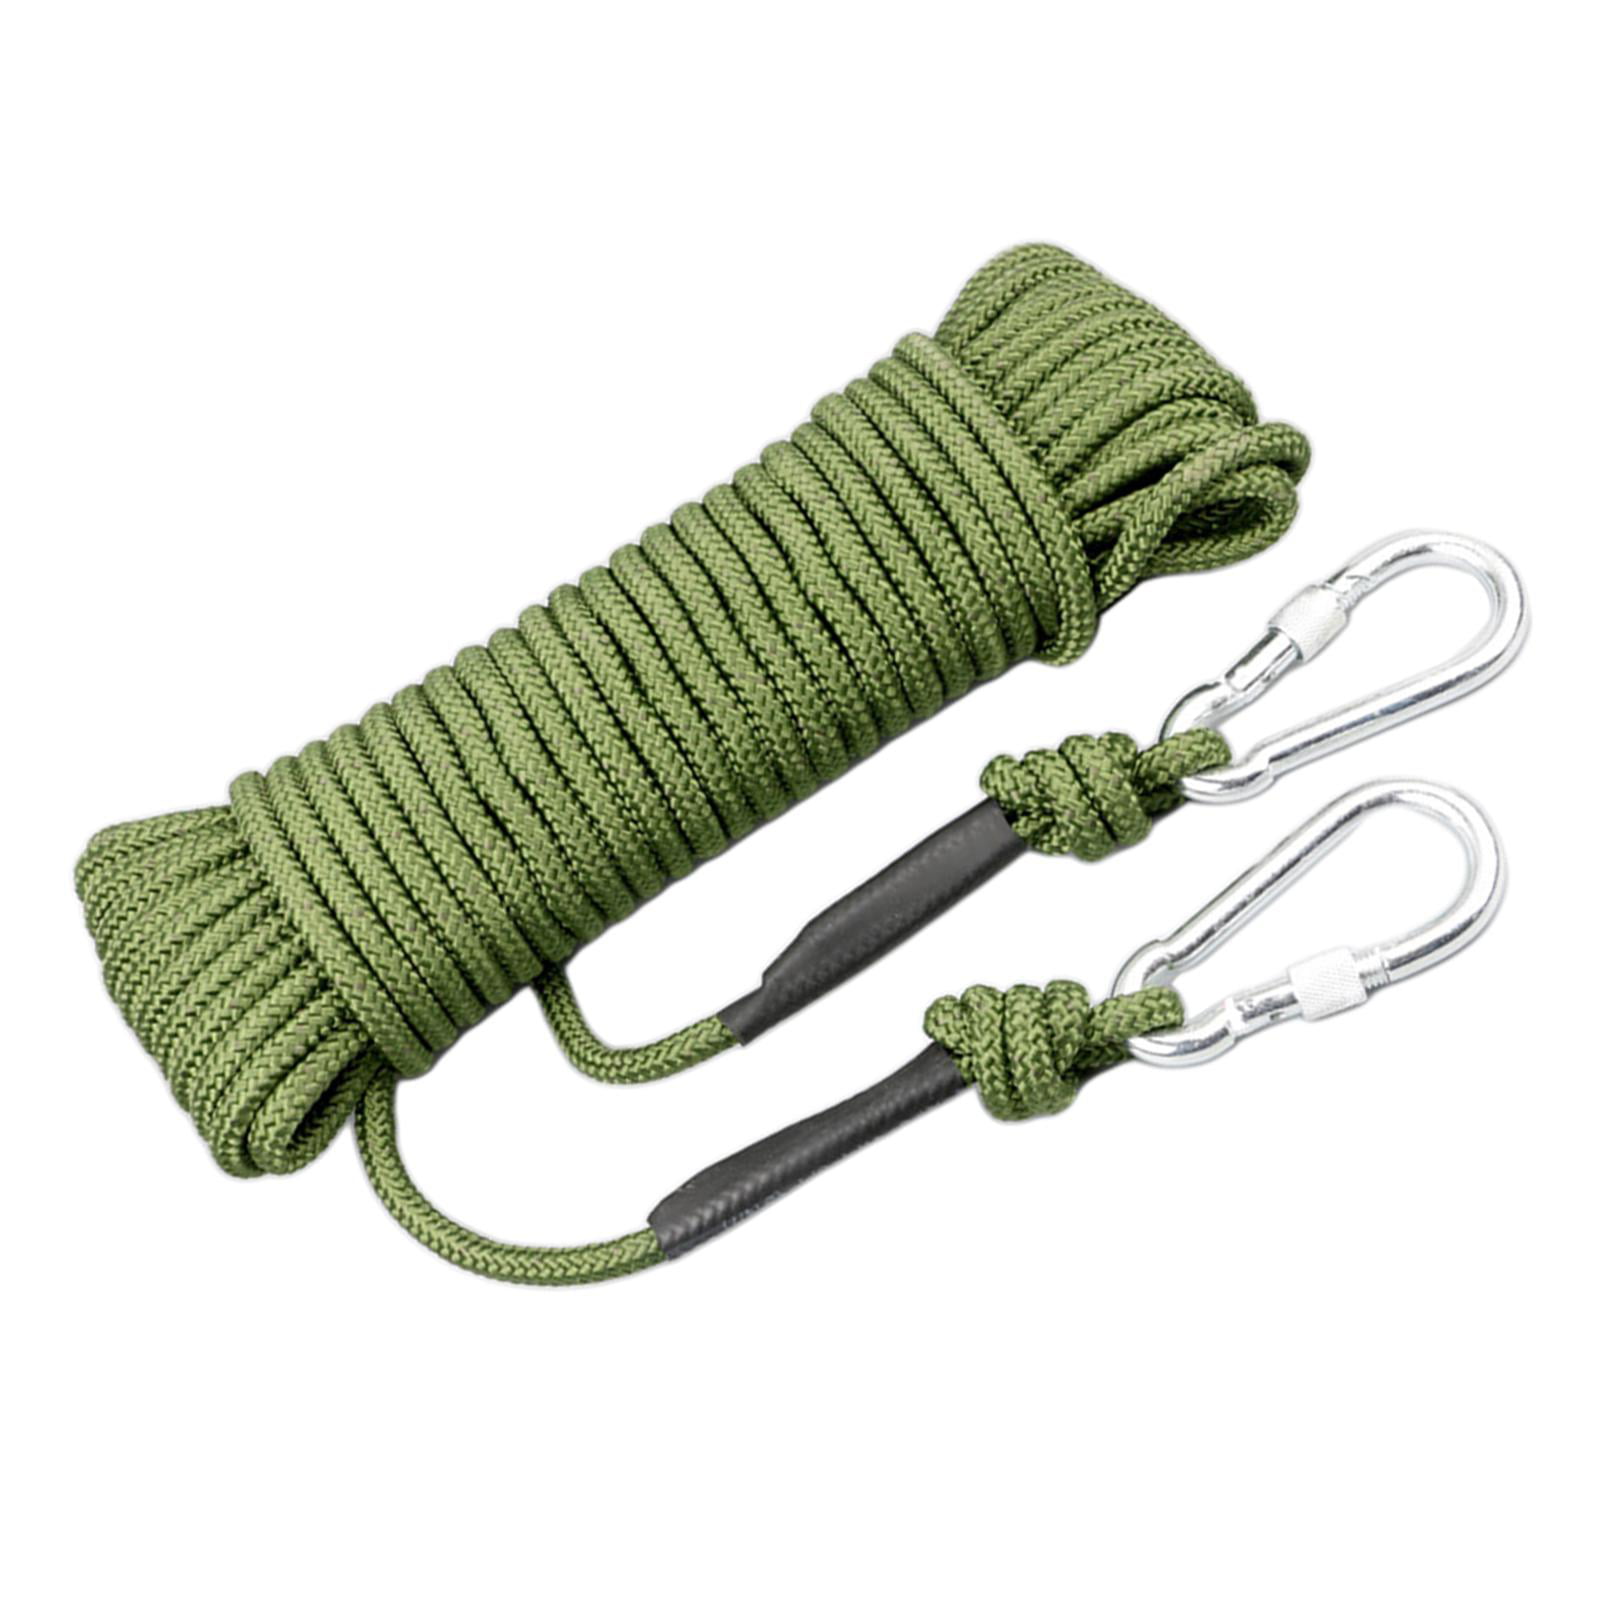 Details about   32ft 49ft 65ft 98ft 164ft 8mm Tree Climbing Hiking Gear Fire Escape Safety Rope 